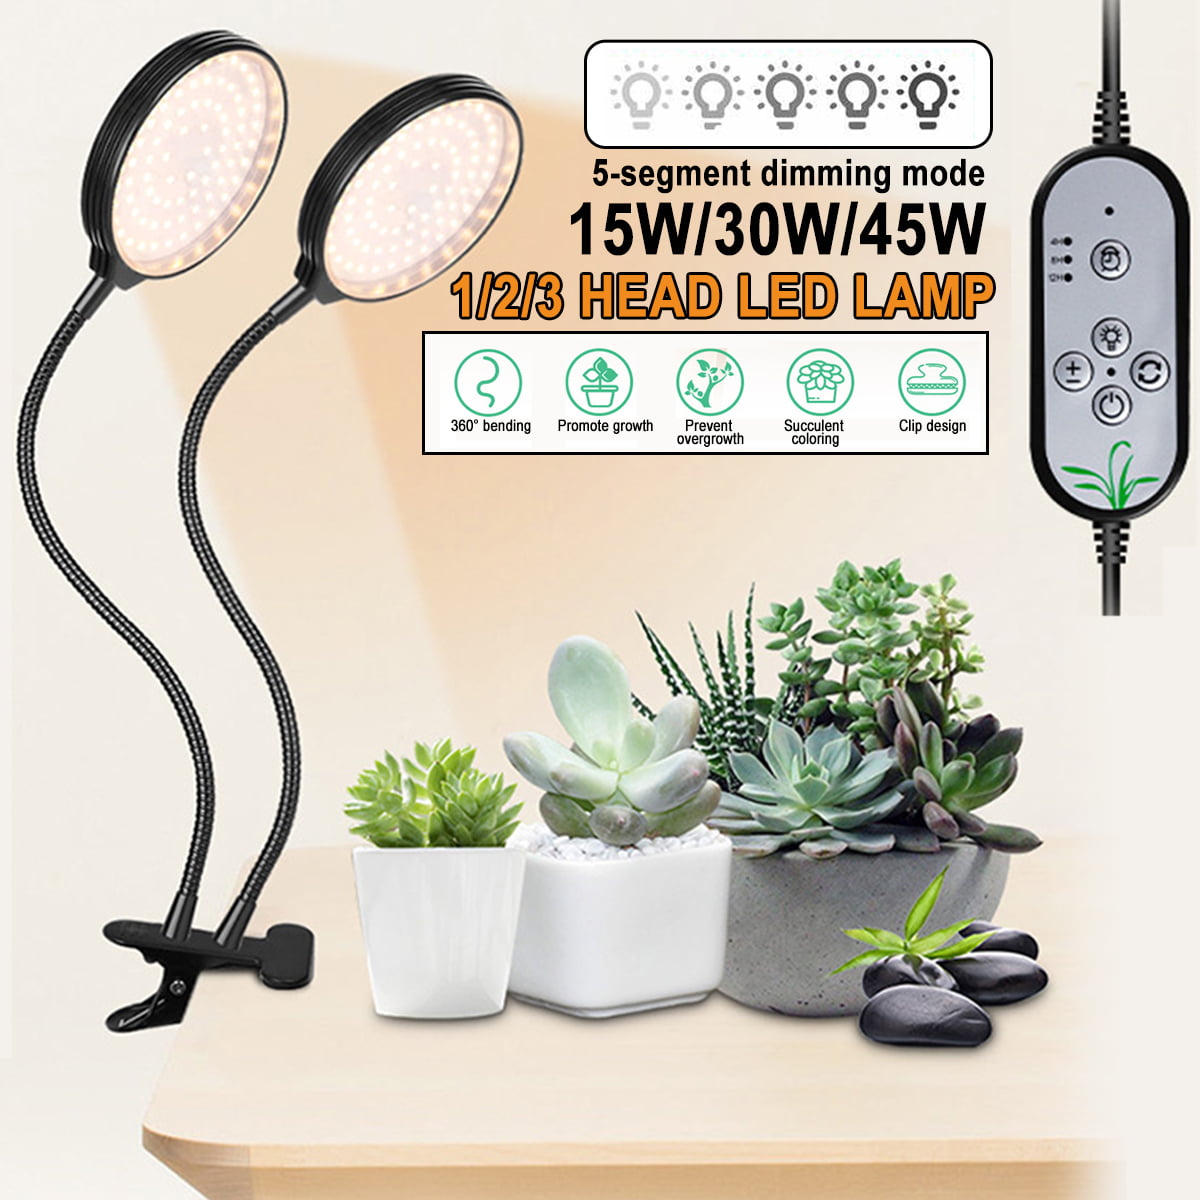 5V LED Grow Light Plant Growing Lamp Lights with Clip Indoor Plants Hydroponics 